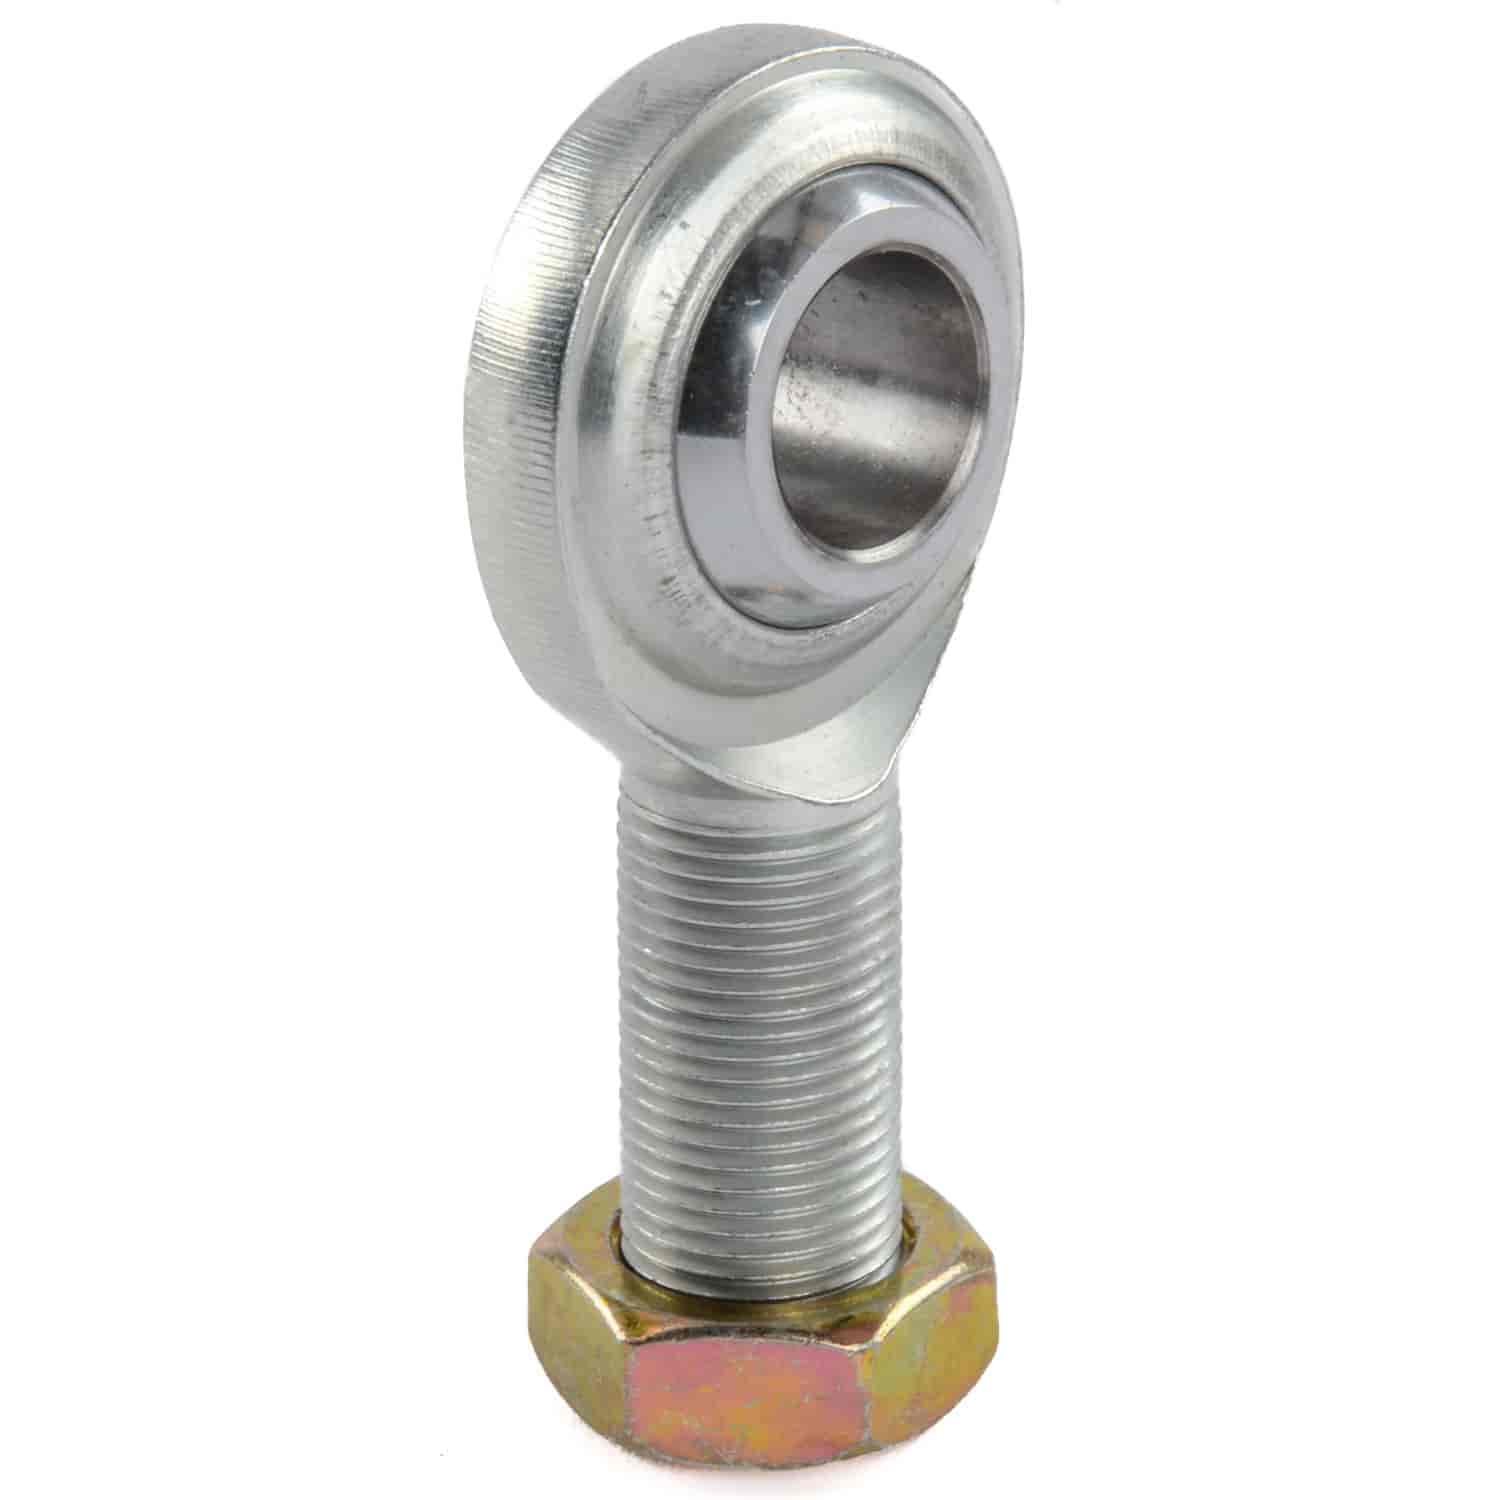 Two-Piece Rod End with Jam Nut 3/4" Hole